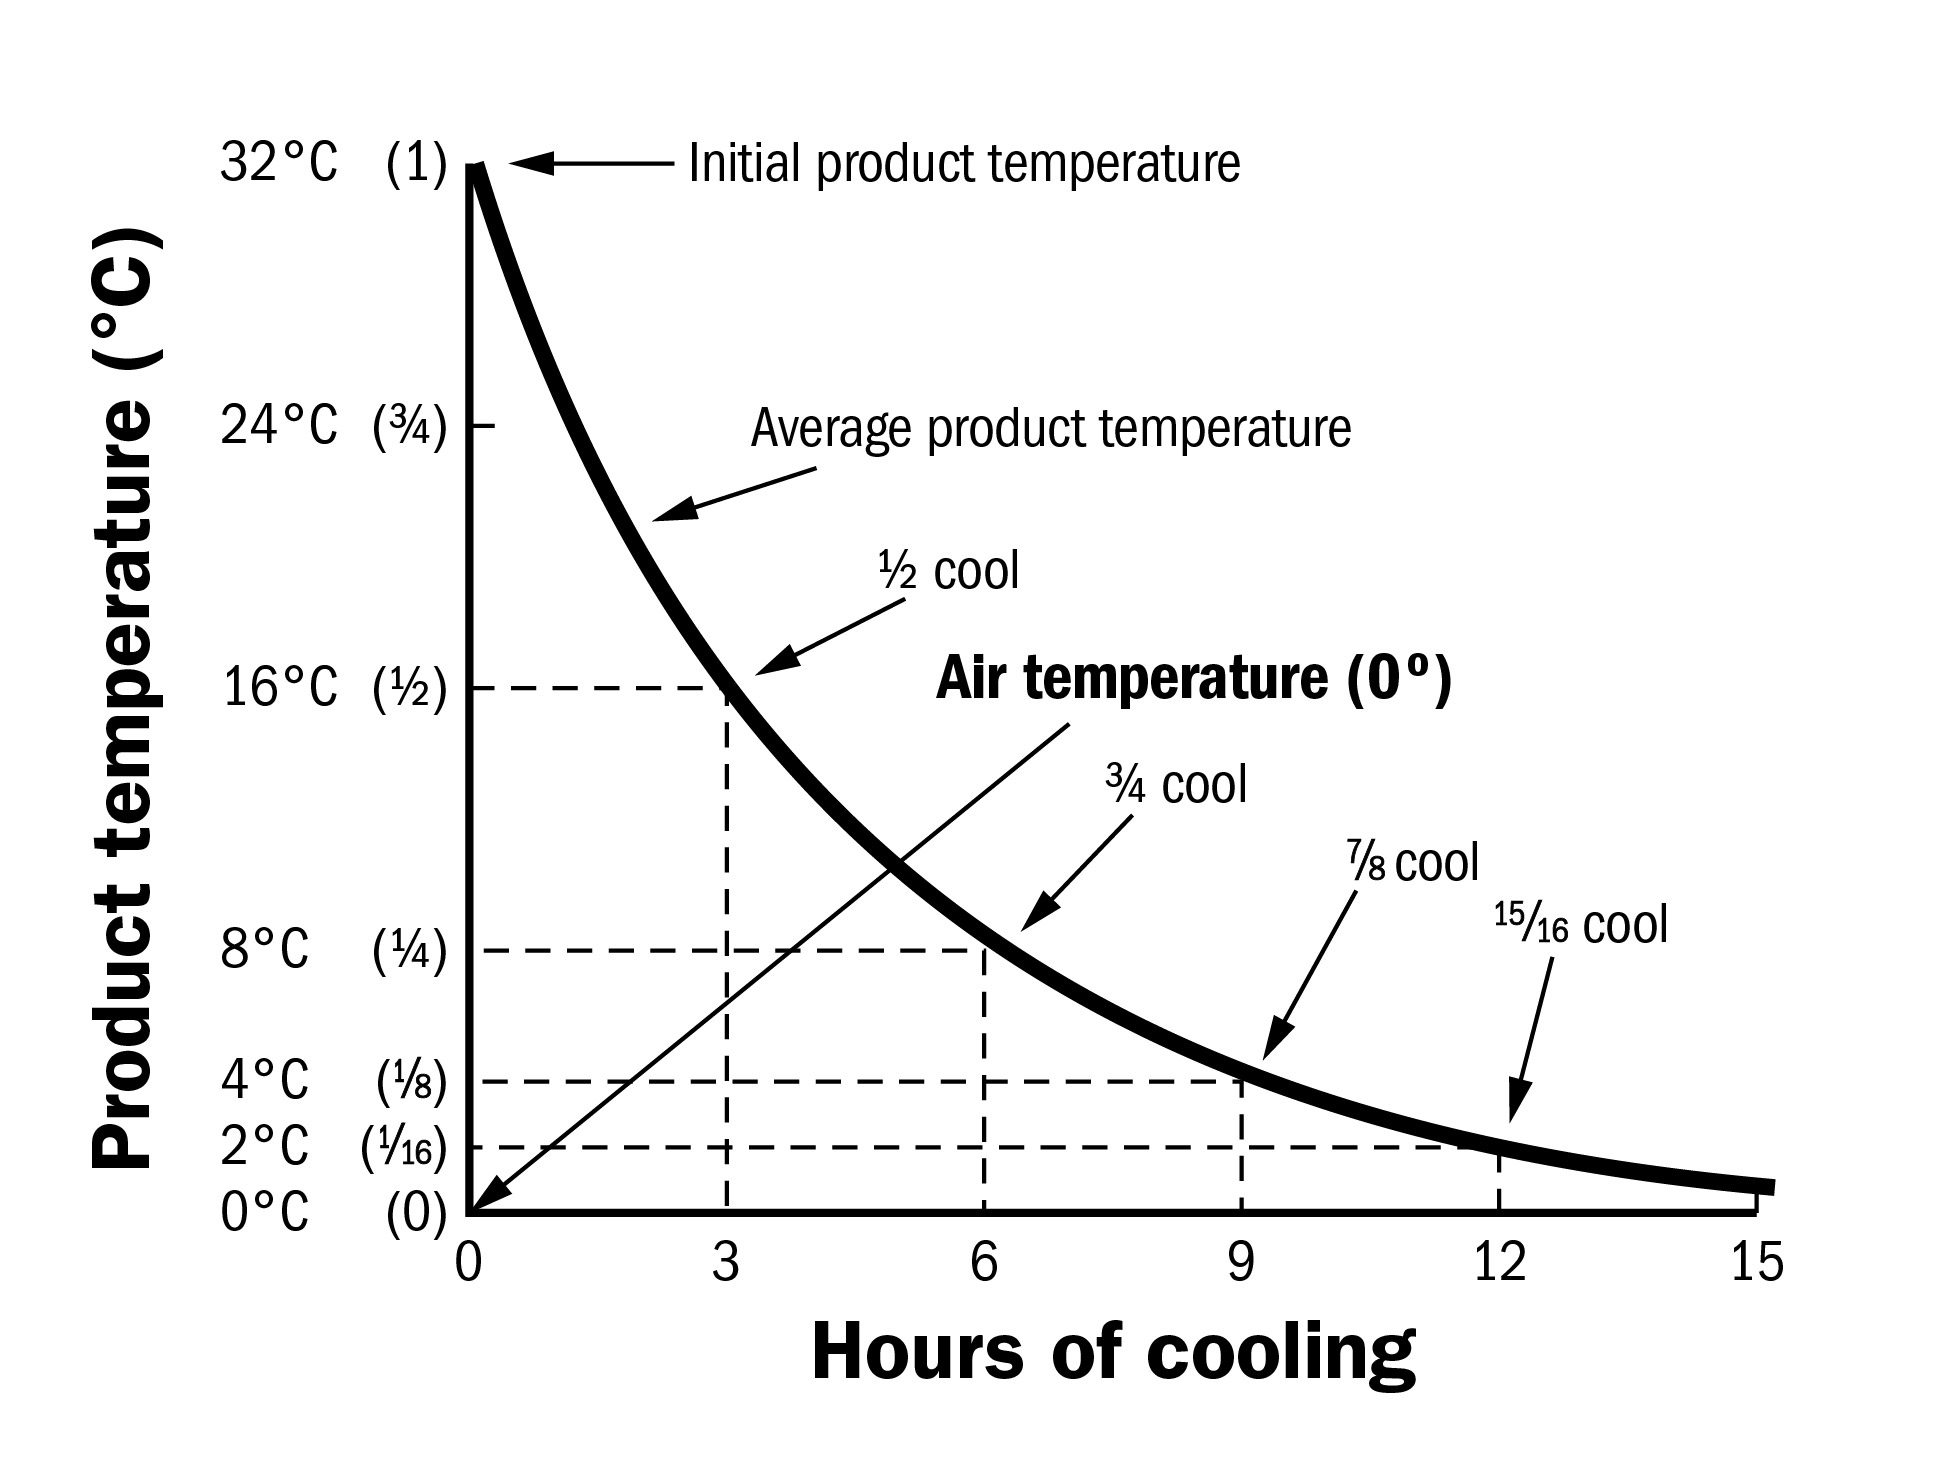 Time-temperature relationship for cooling produce.